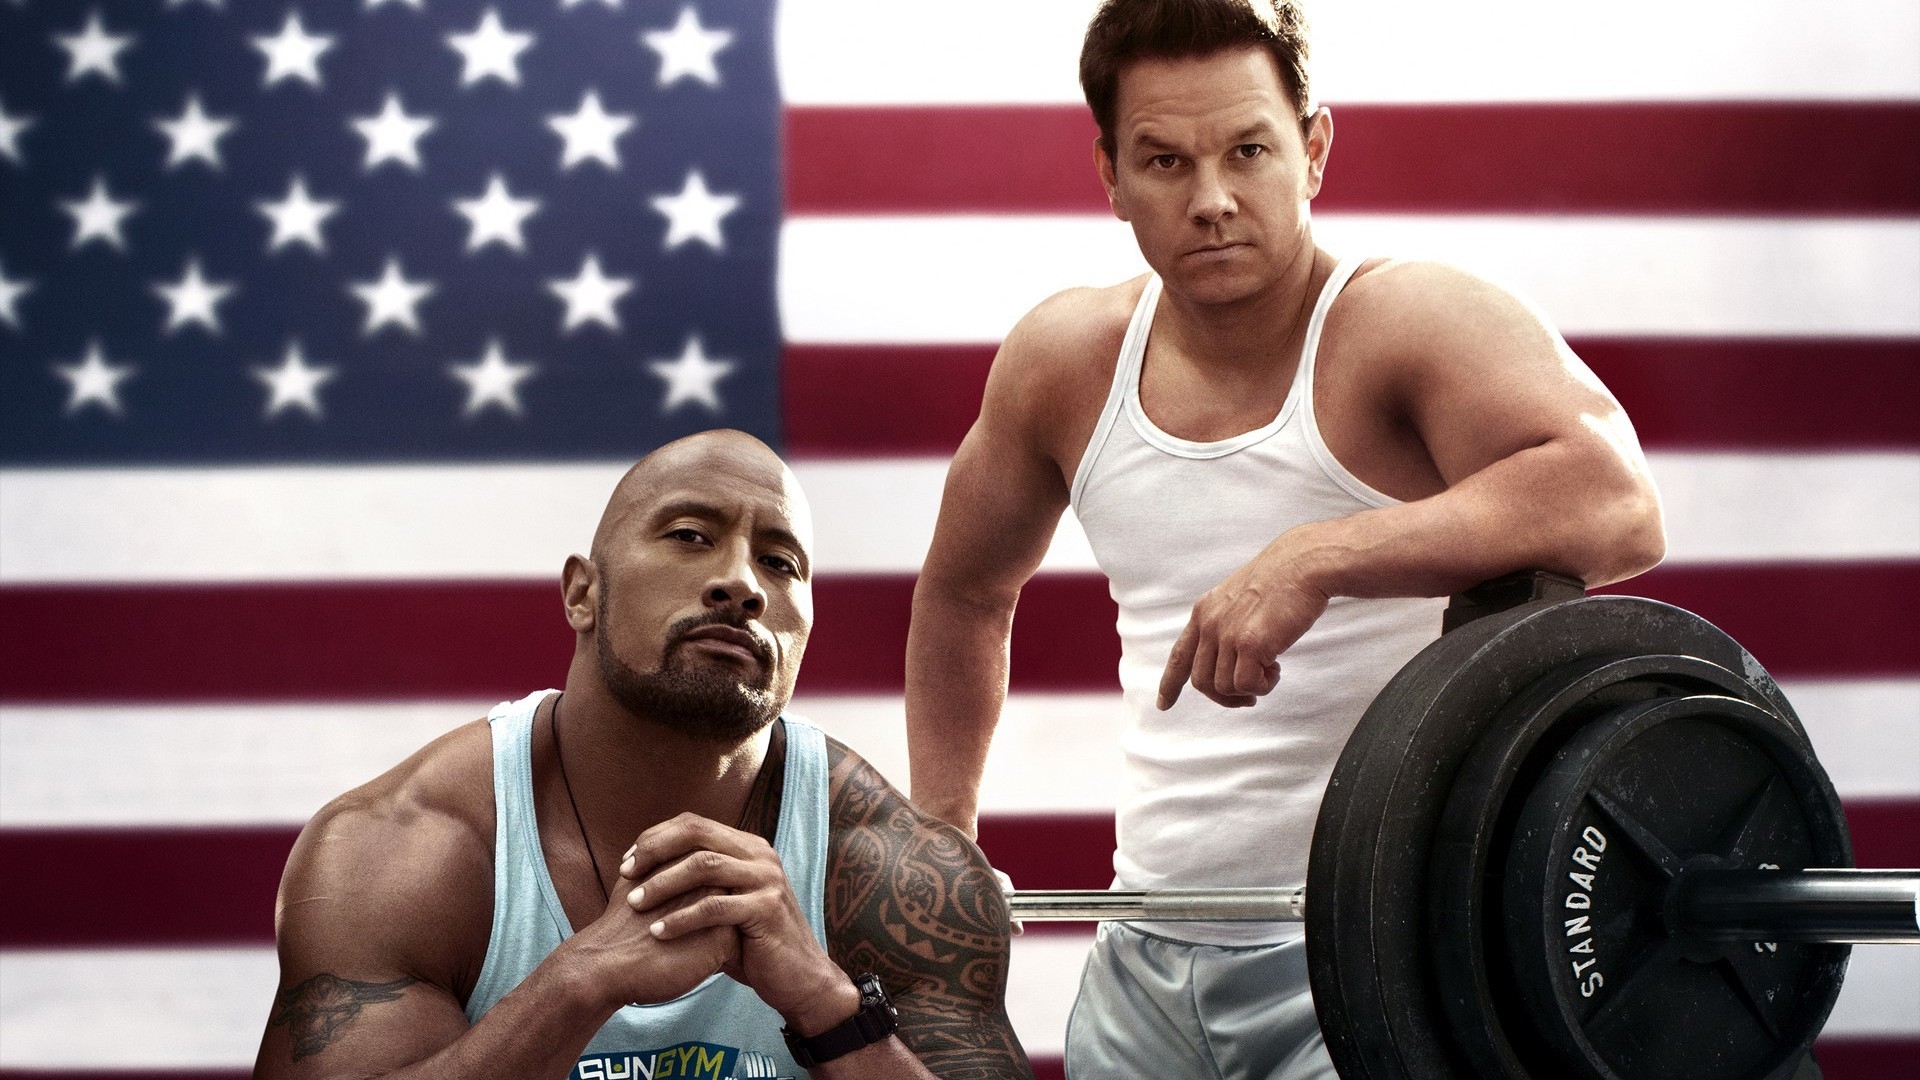 Pain & Gain for 1920 x 1080 HDTV 1080p resolution